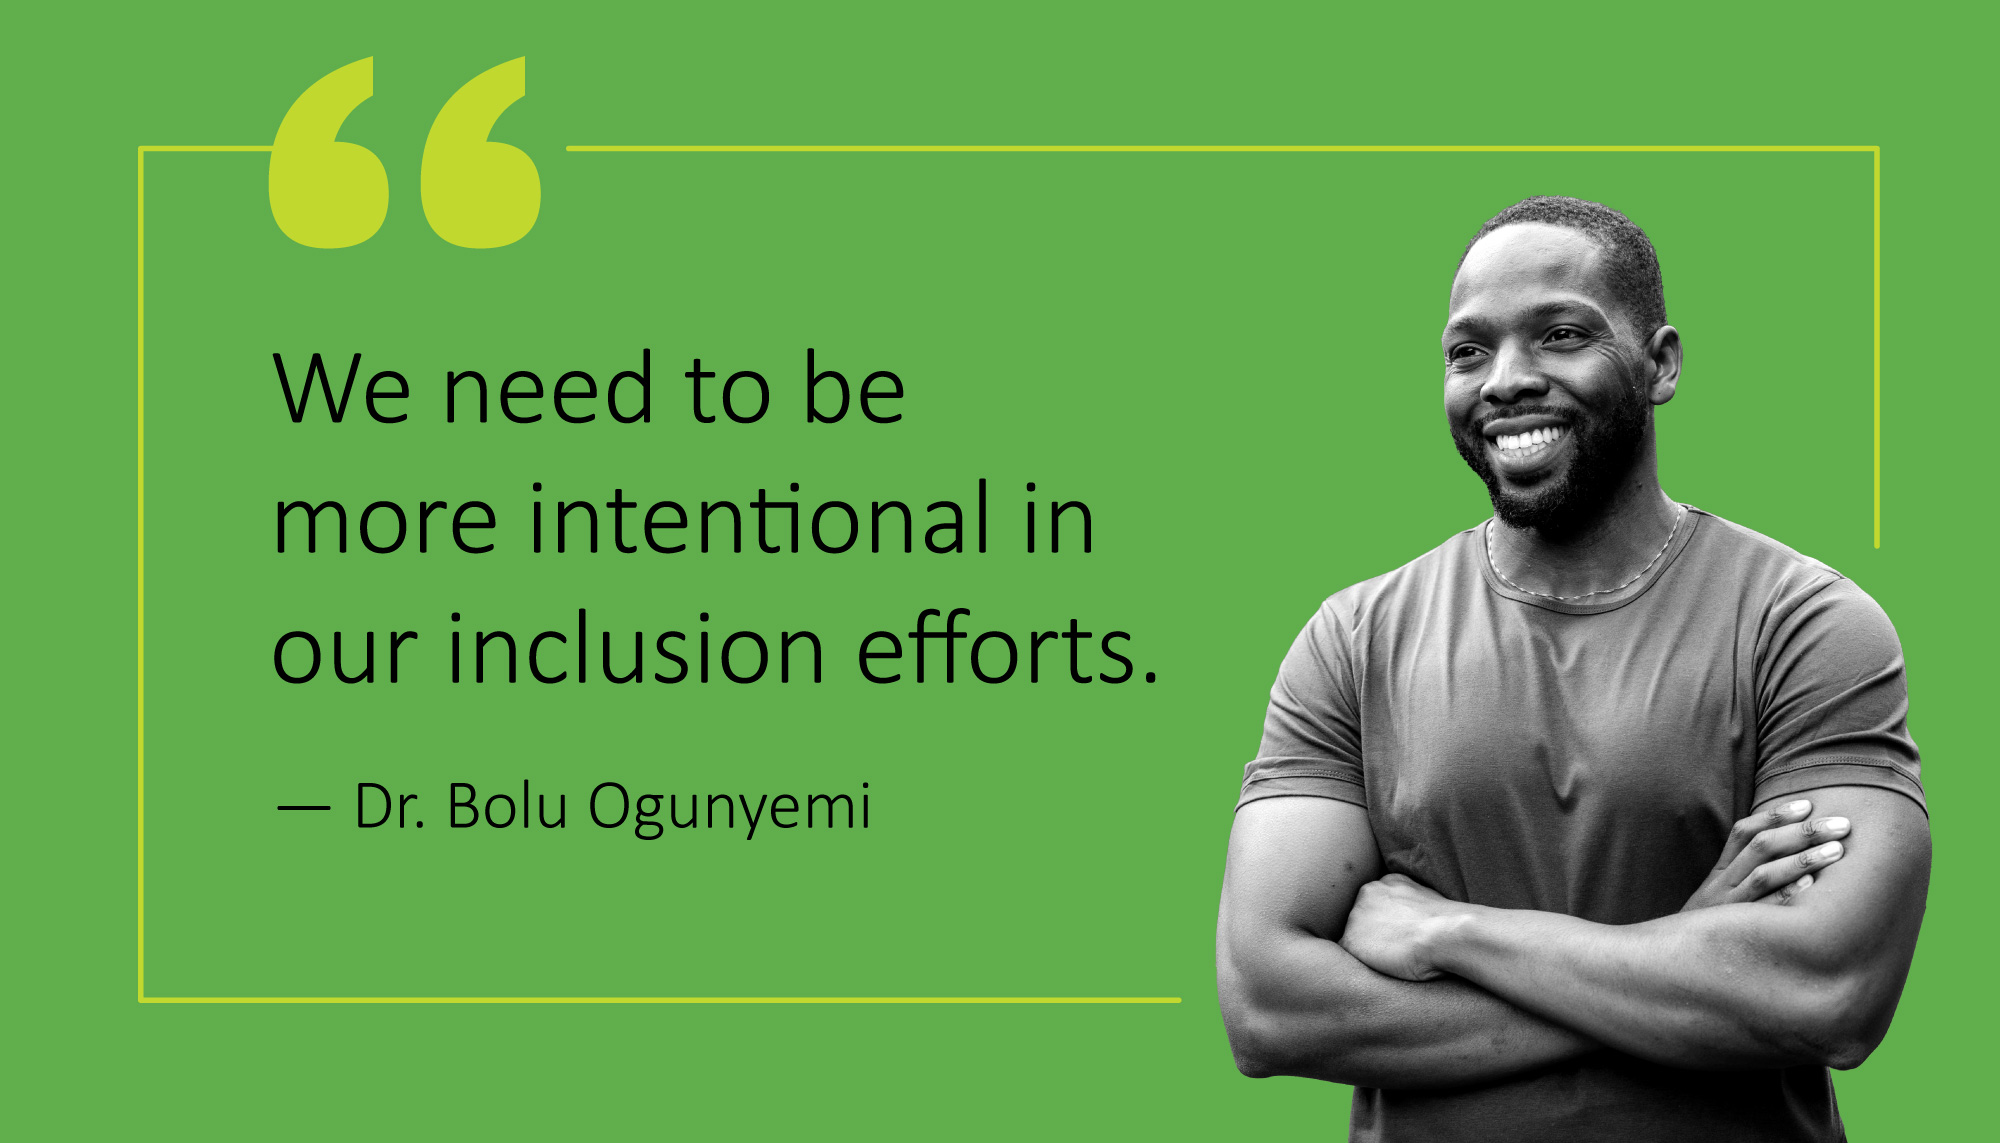 We need to be more intentional in our inclusion efforts. - Dr. Bolu Ogunyemi